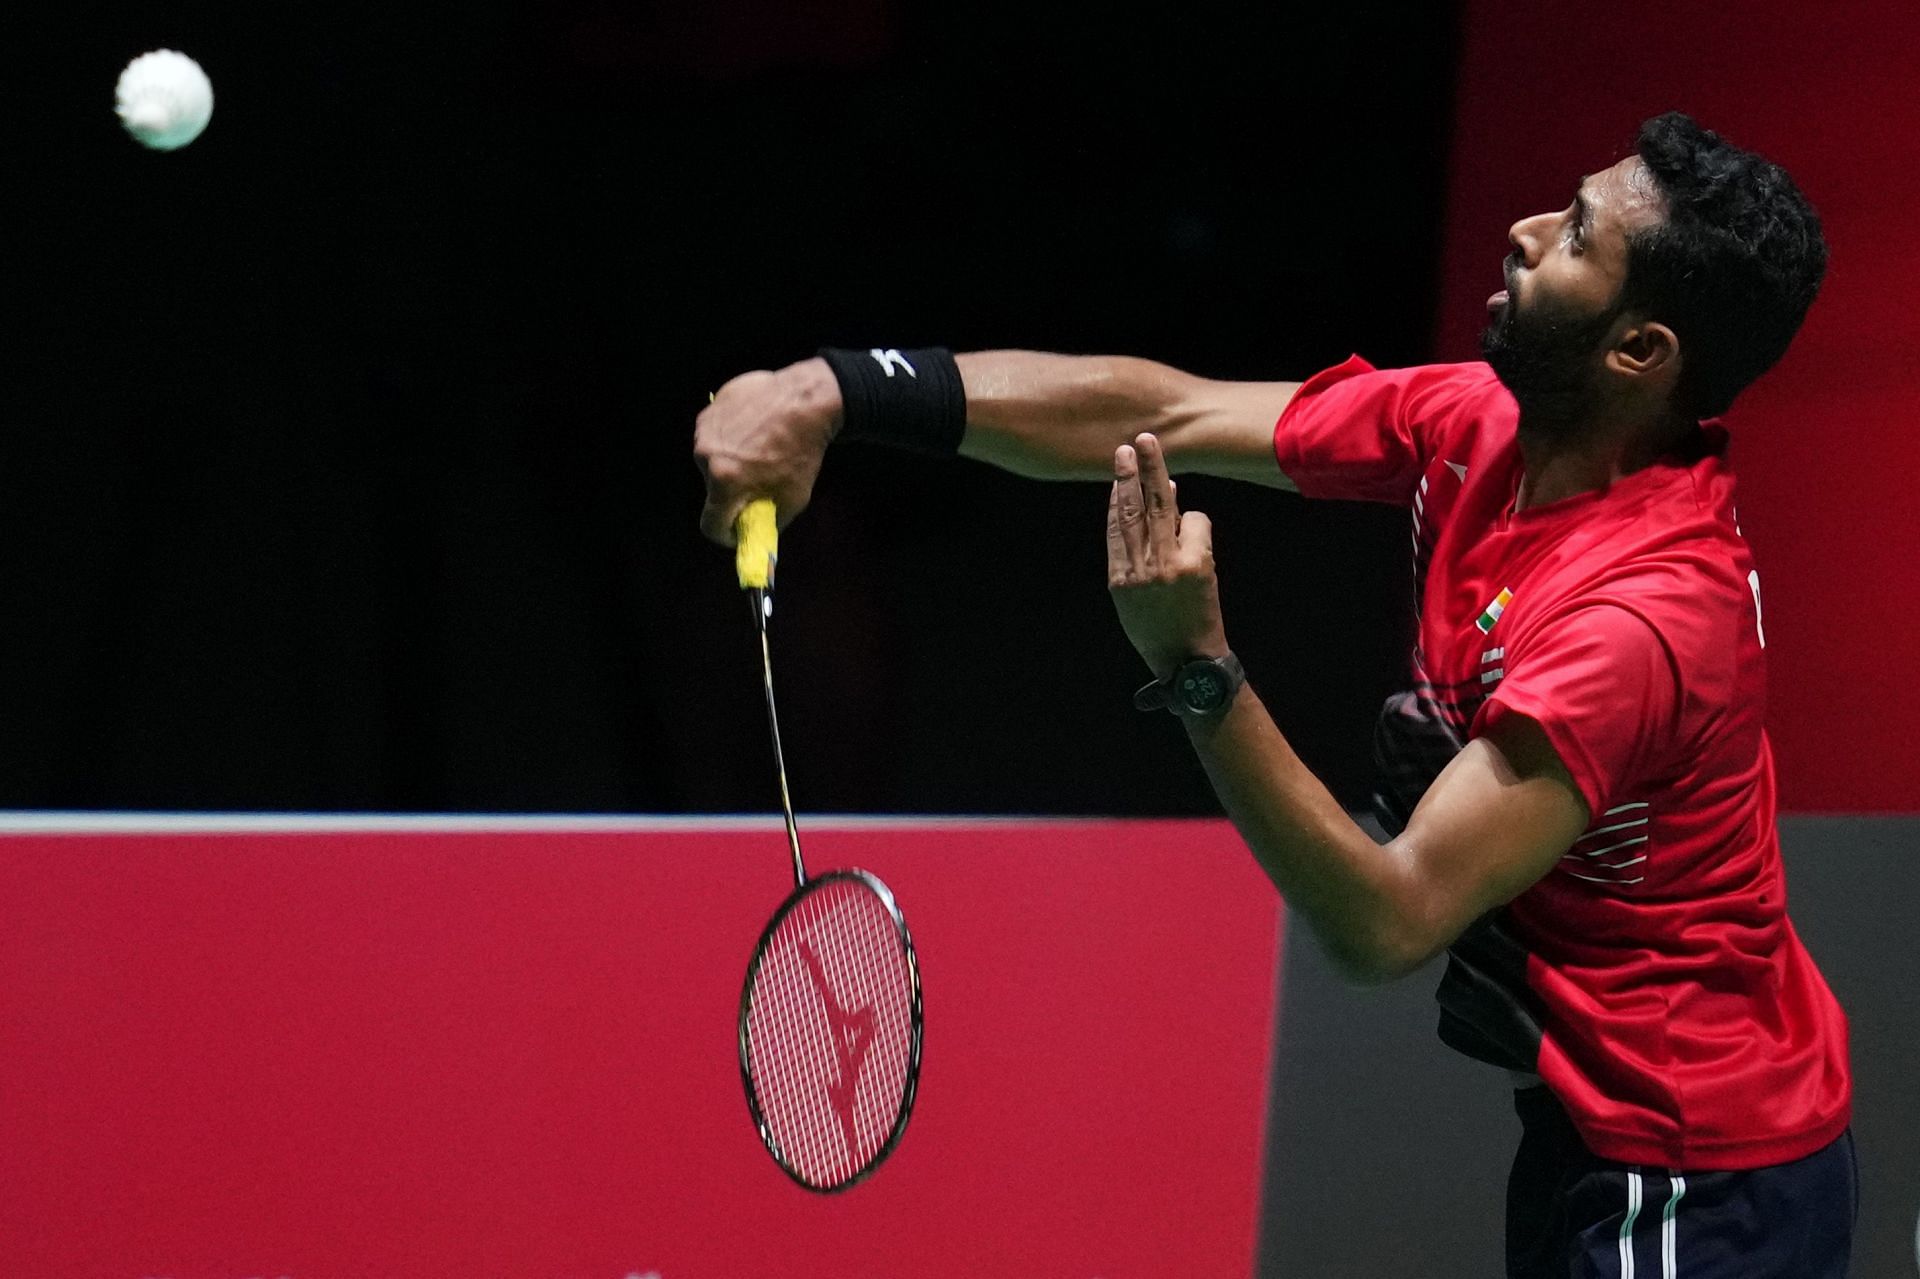 Korea Open 2023 HS Prannoy vs Lee Cheuk Yiu, head-to-head, prediction, where to watch and live streaming details